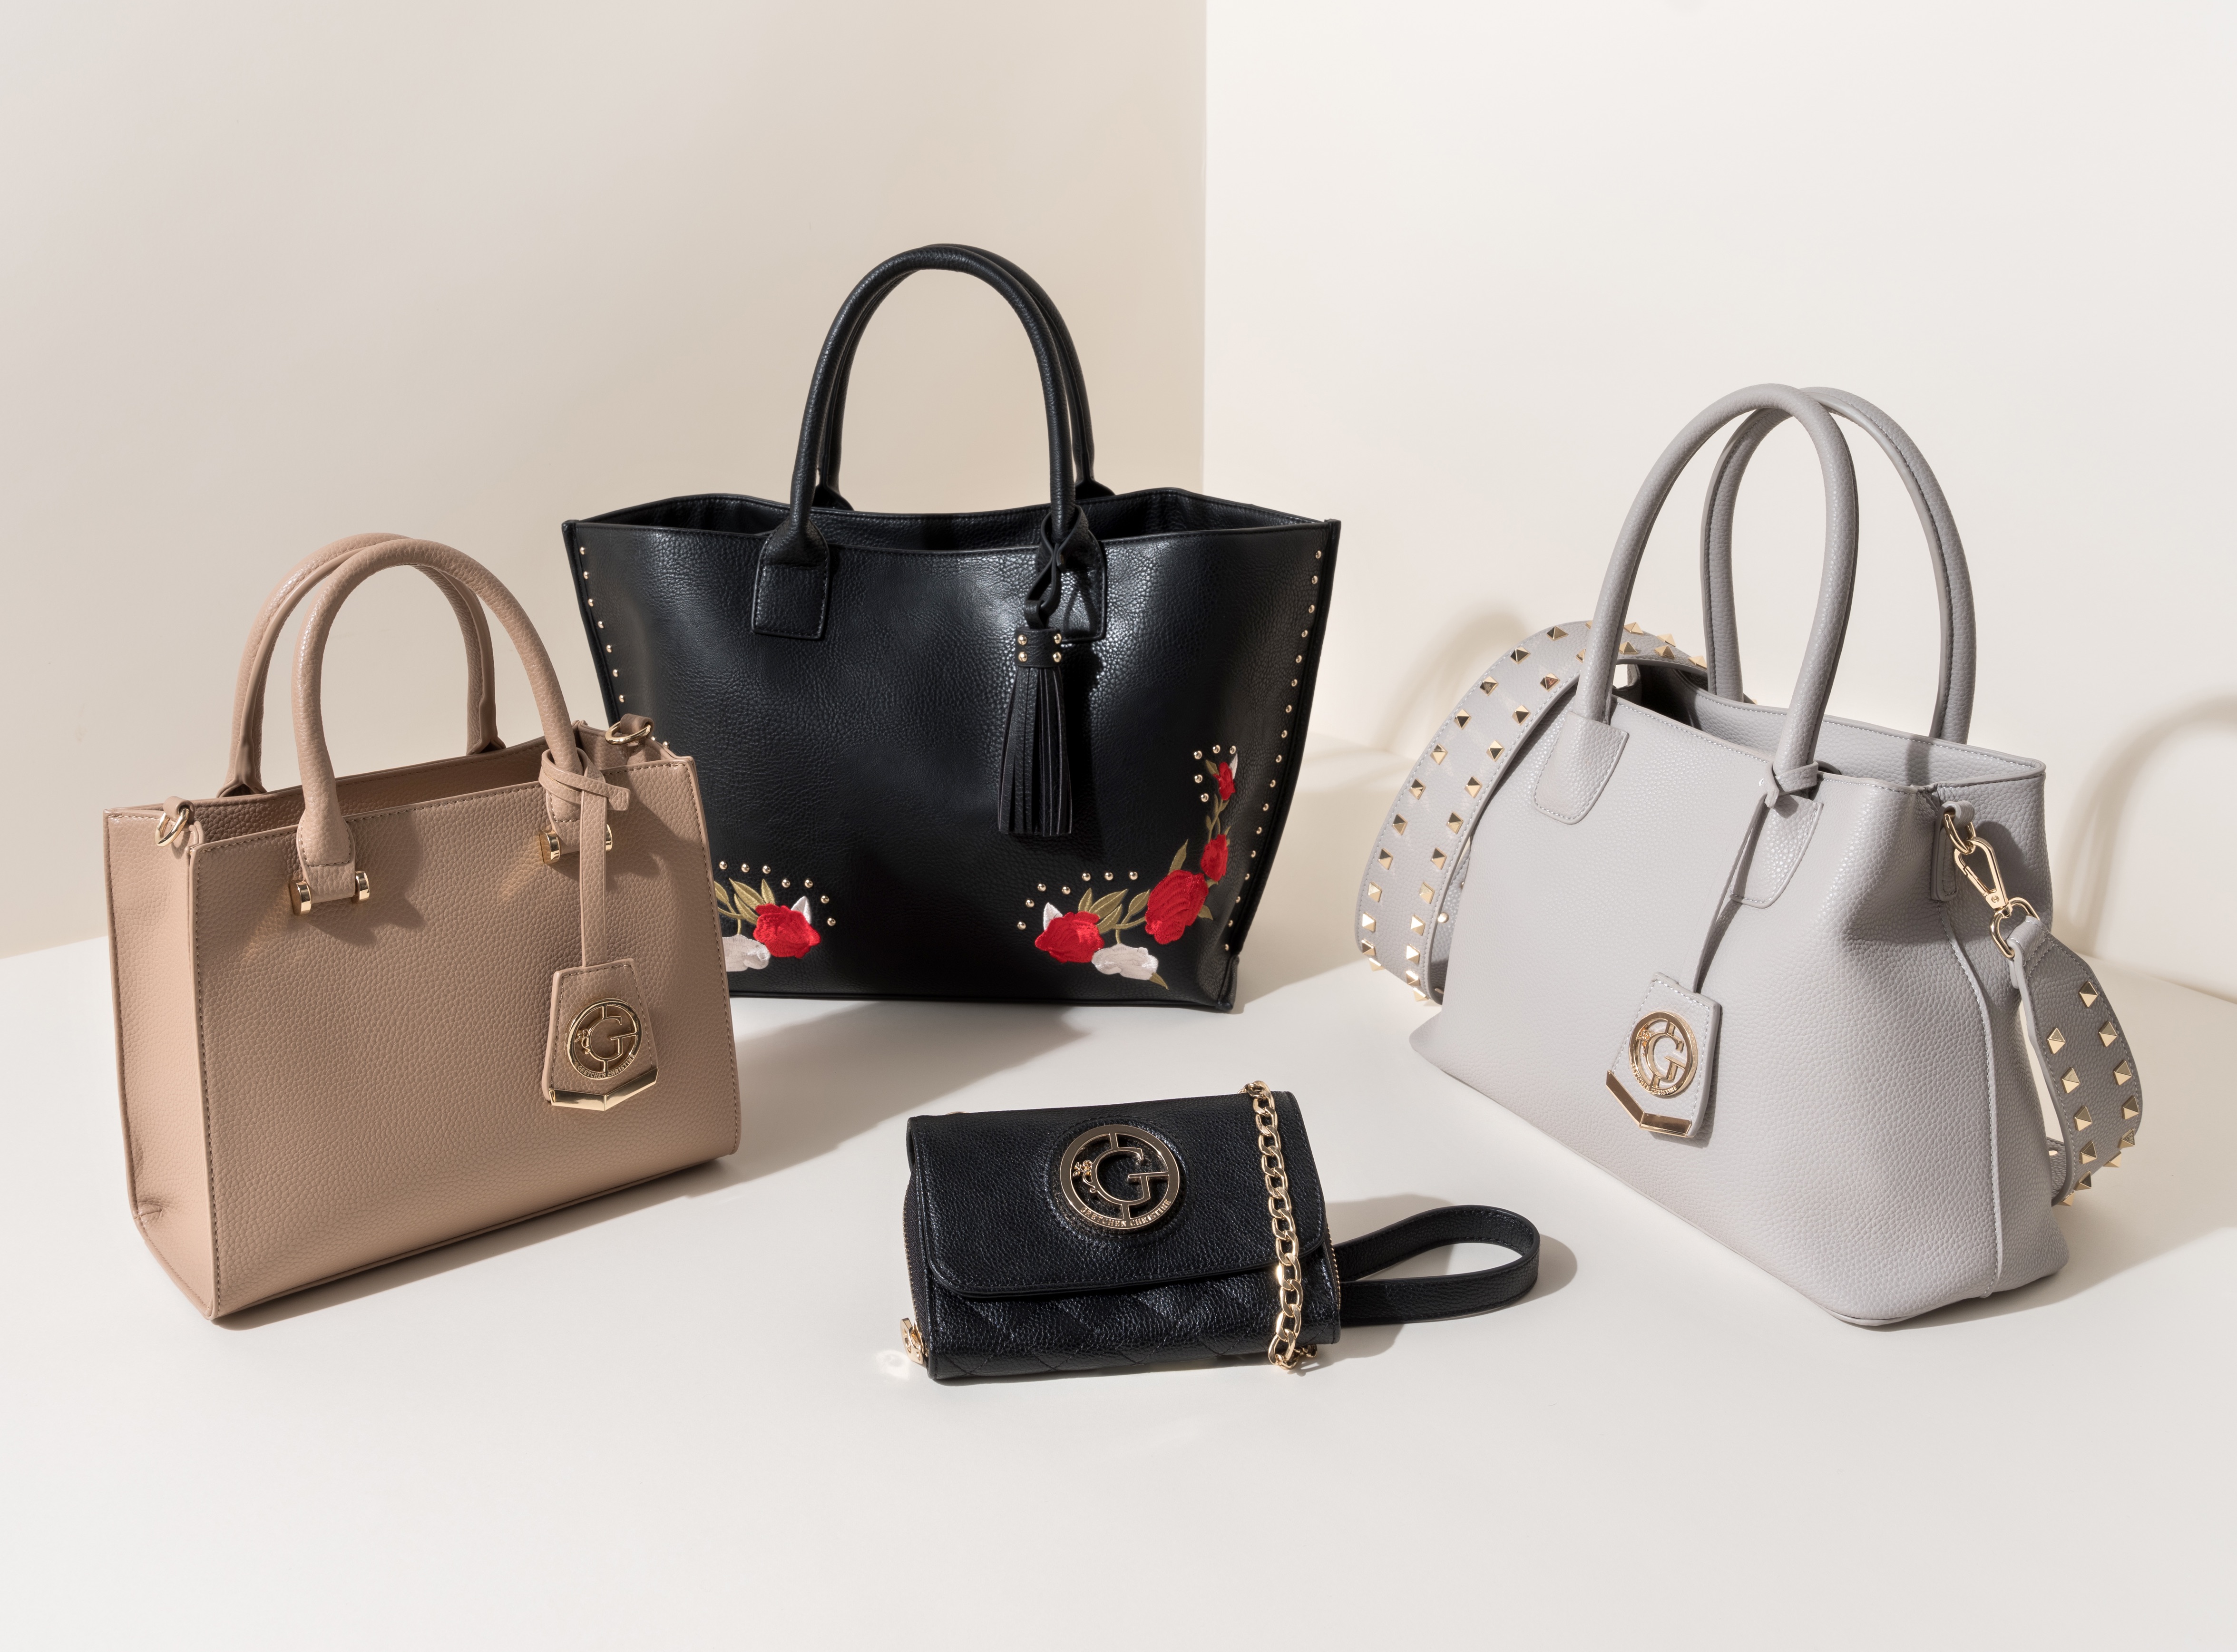 Vegan Handbags by The Gretchen Christine Collection - FAB FIVE LIFESTYLE